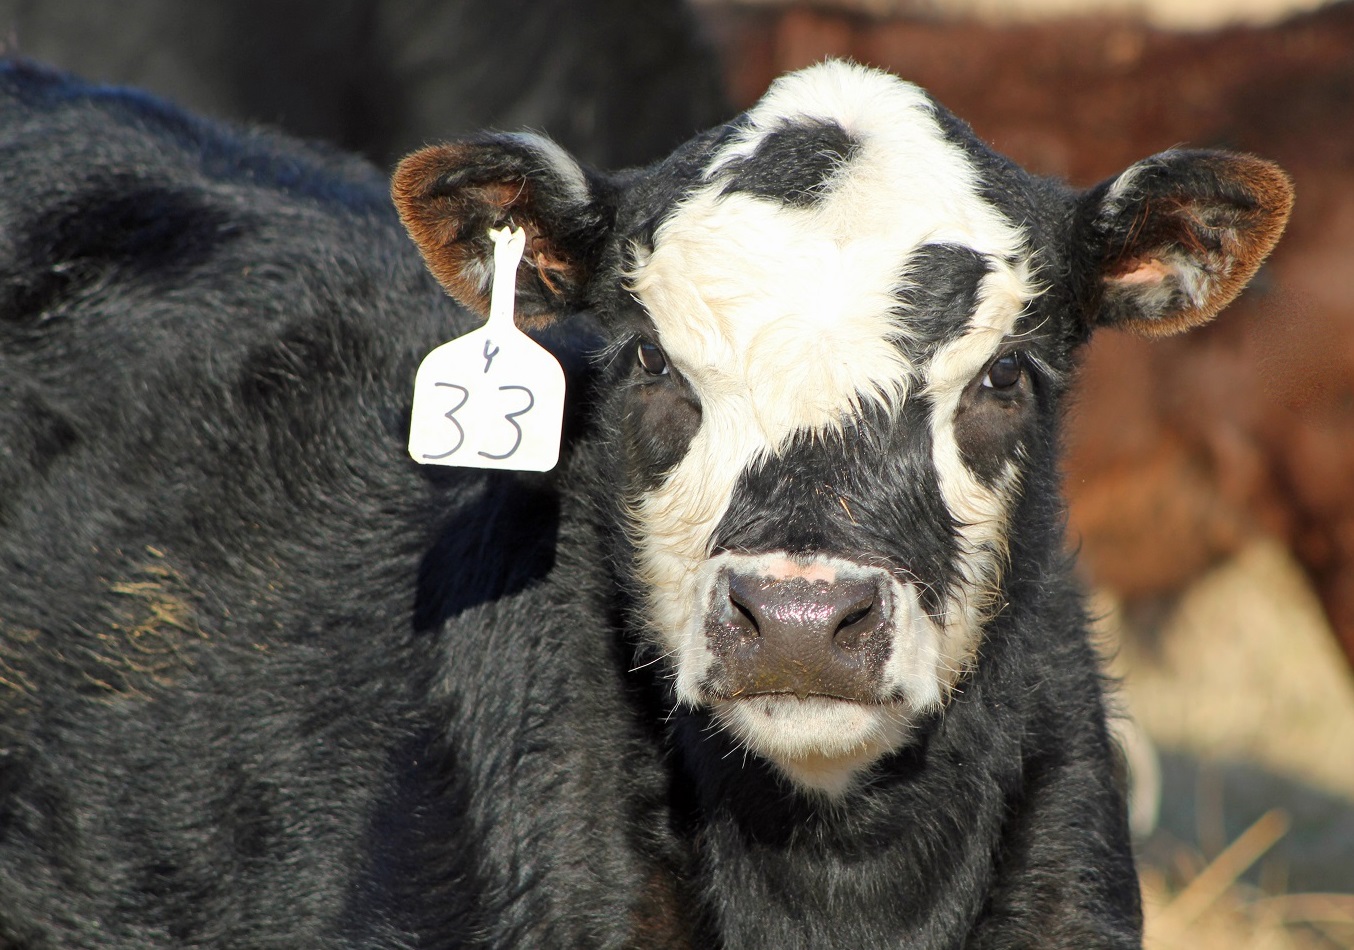  For cow-calf producers, UCOP is figured as cost per pound of weaned calf. Photo courtesy of Troy Walz.